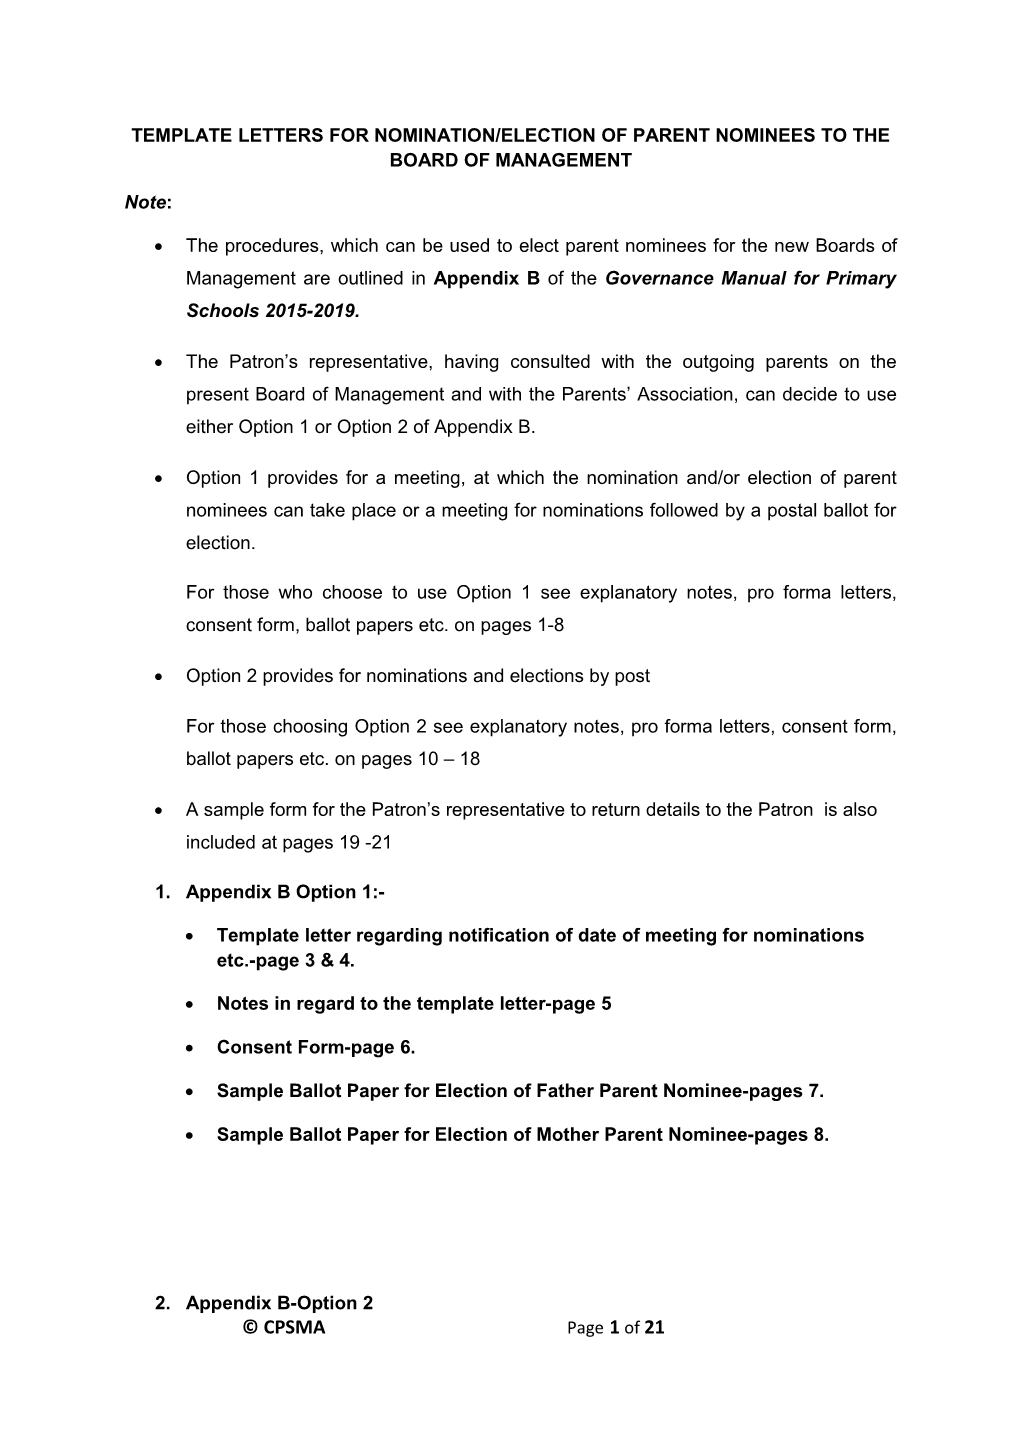 Template Letters for Nomination/Election of Parent Nominees to the Board of Management